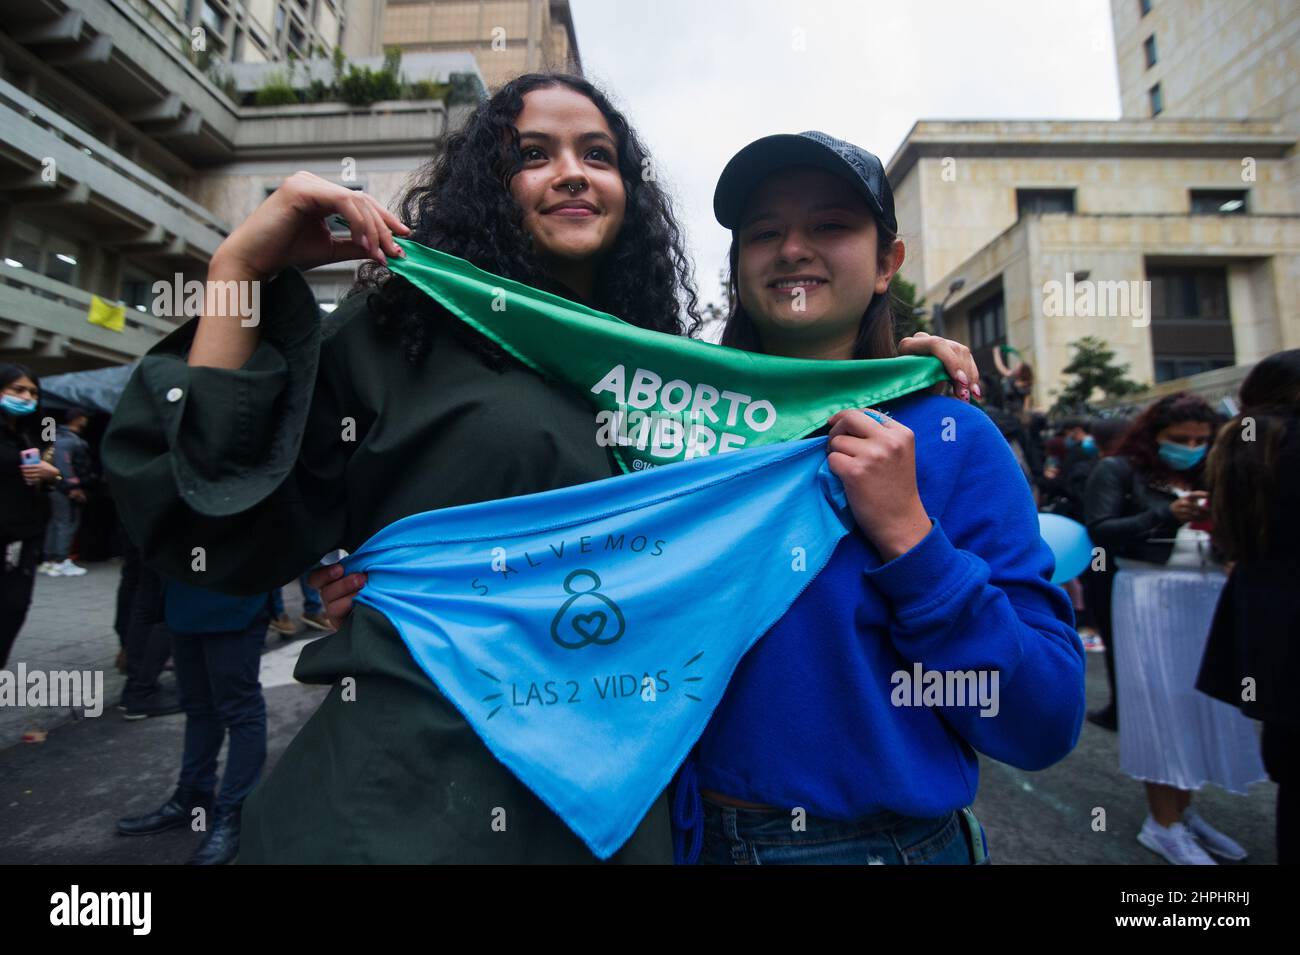 A pro-choice and a Anti-abortion activists pose toghether as their movements protest outside in support and against the decriminalization of abortions from the penal code, outside the Constitutional Court in Bogota, Colombia on February 21, 2022. Abortions were decriminalized after 8 hours of debate leading now access for pregnant women to access them up to week 24. Stock Photo